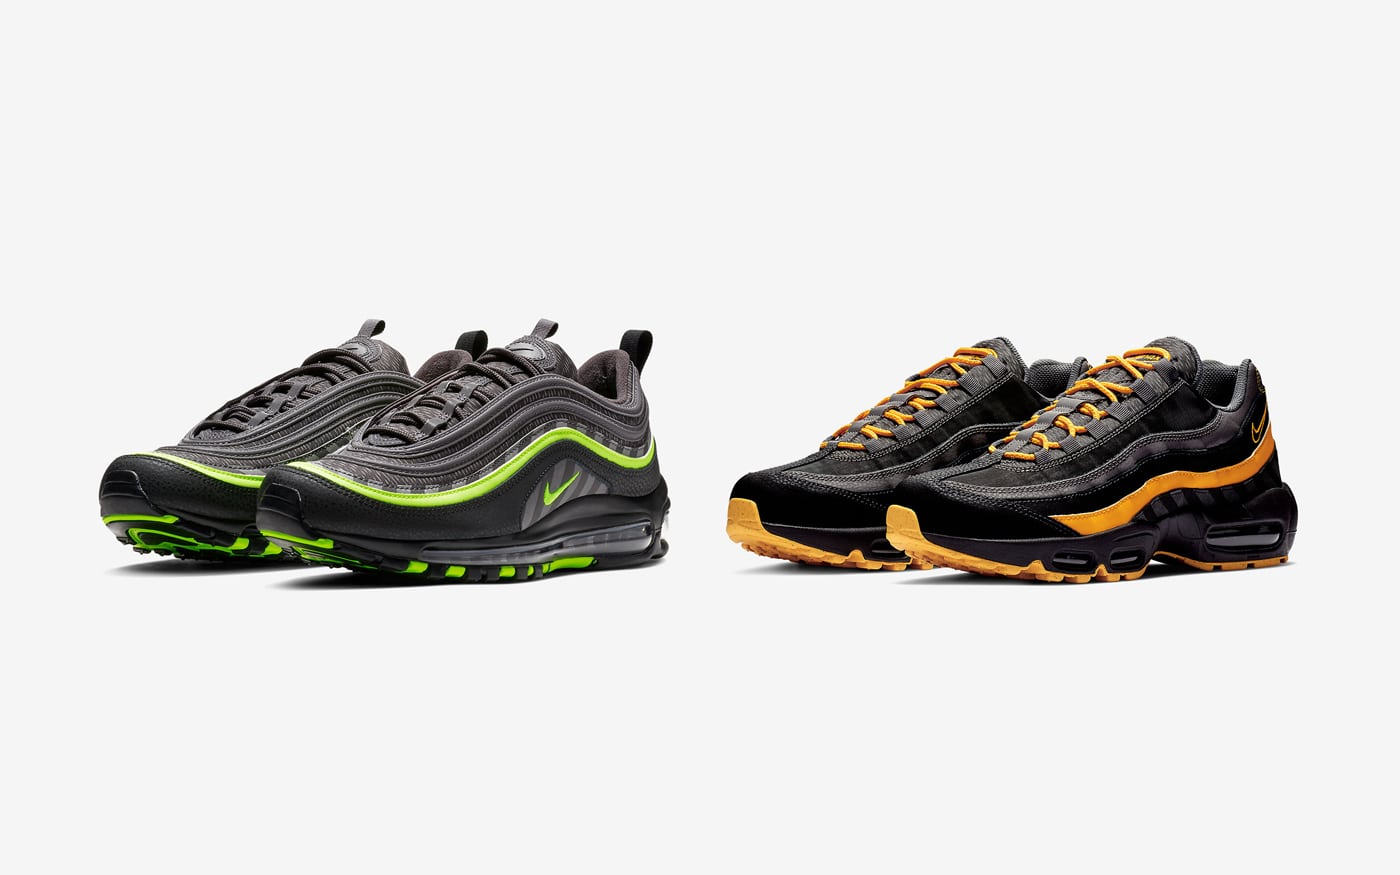 The Nike Air Max “I-95” Pack Drops On January 26th | HOUSE OF HEAT